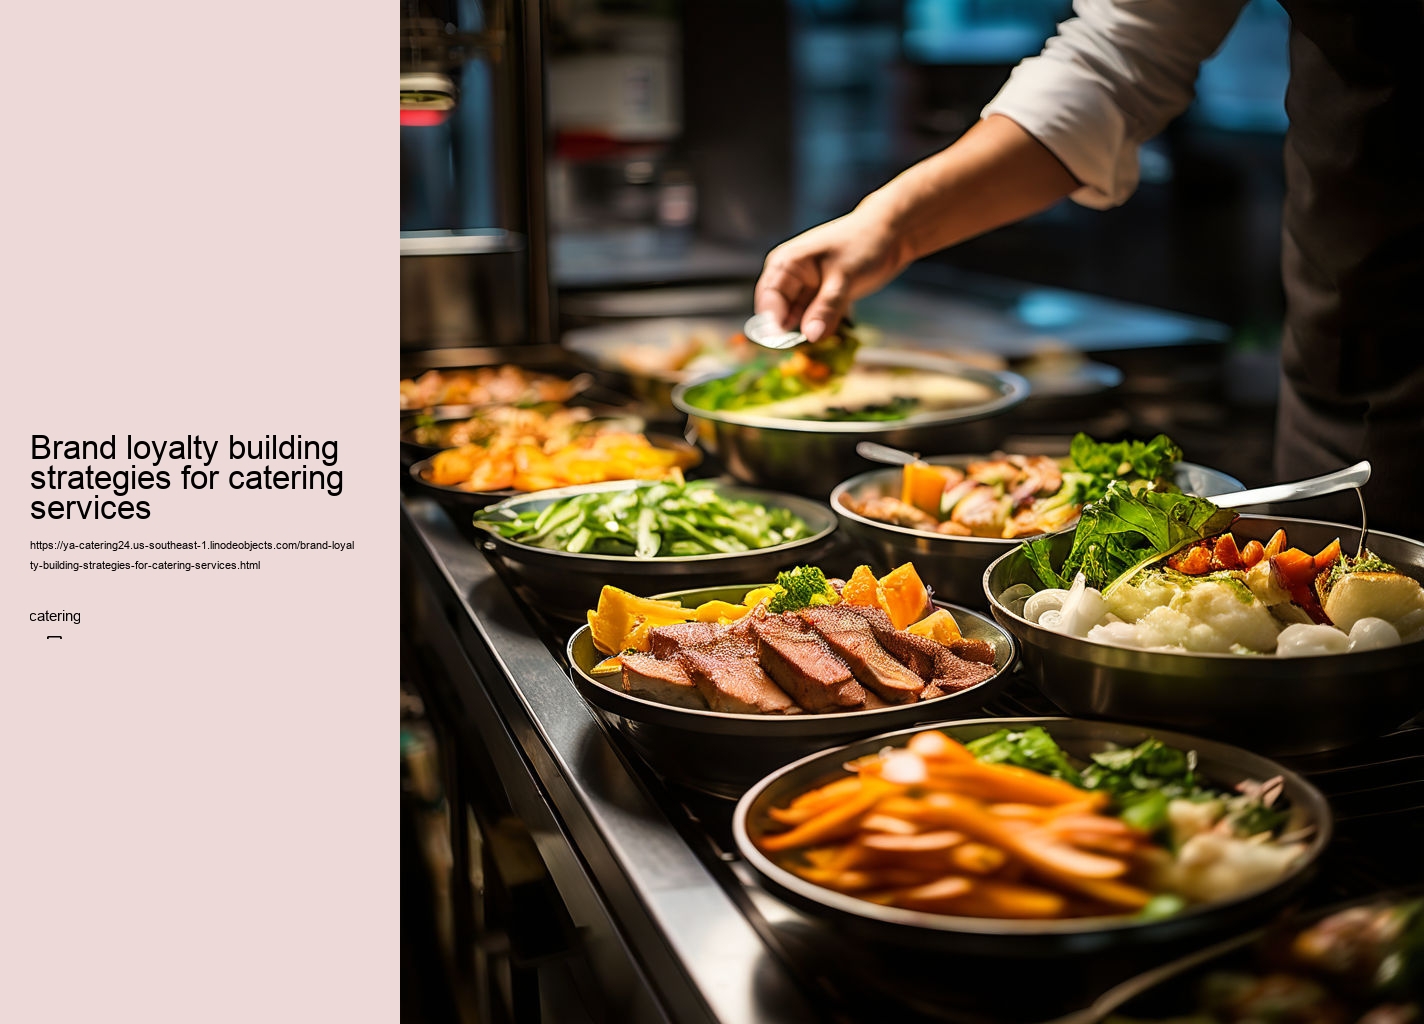 Brand loyalty building strategies for catering services